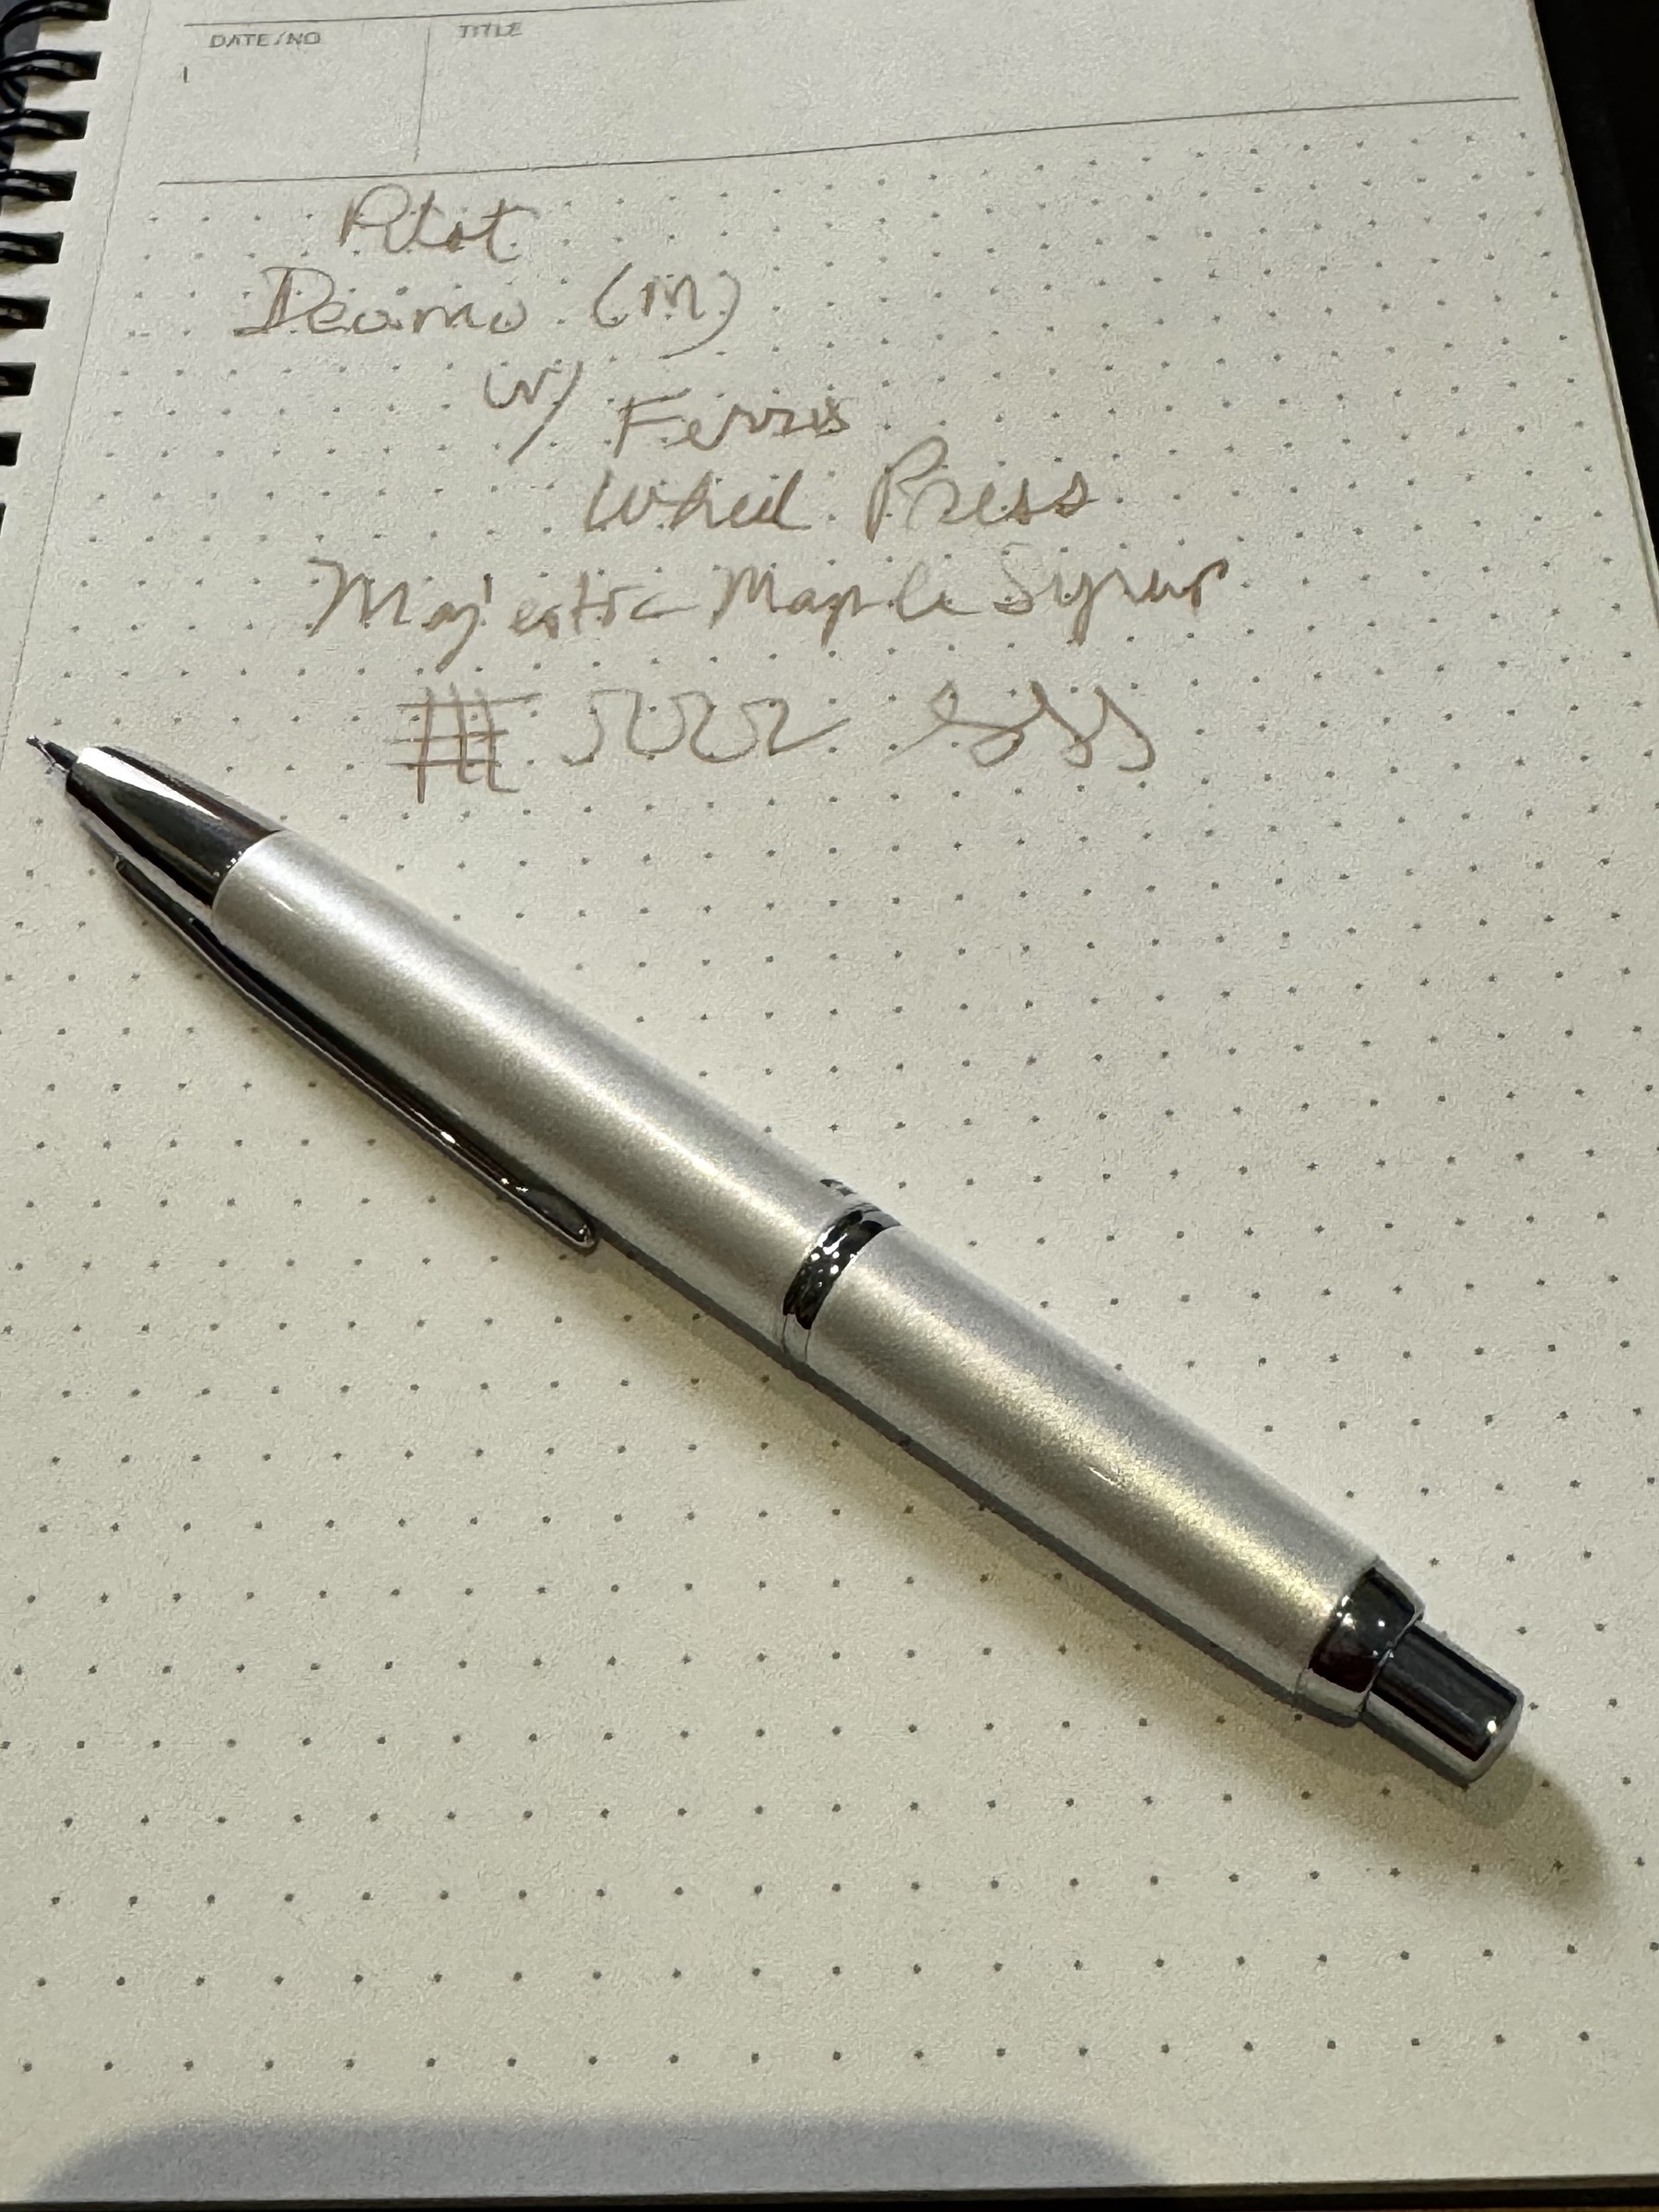 Fountain pen and ink